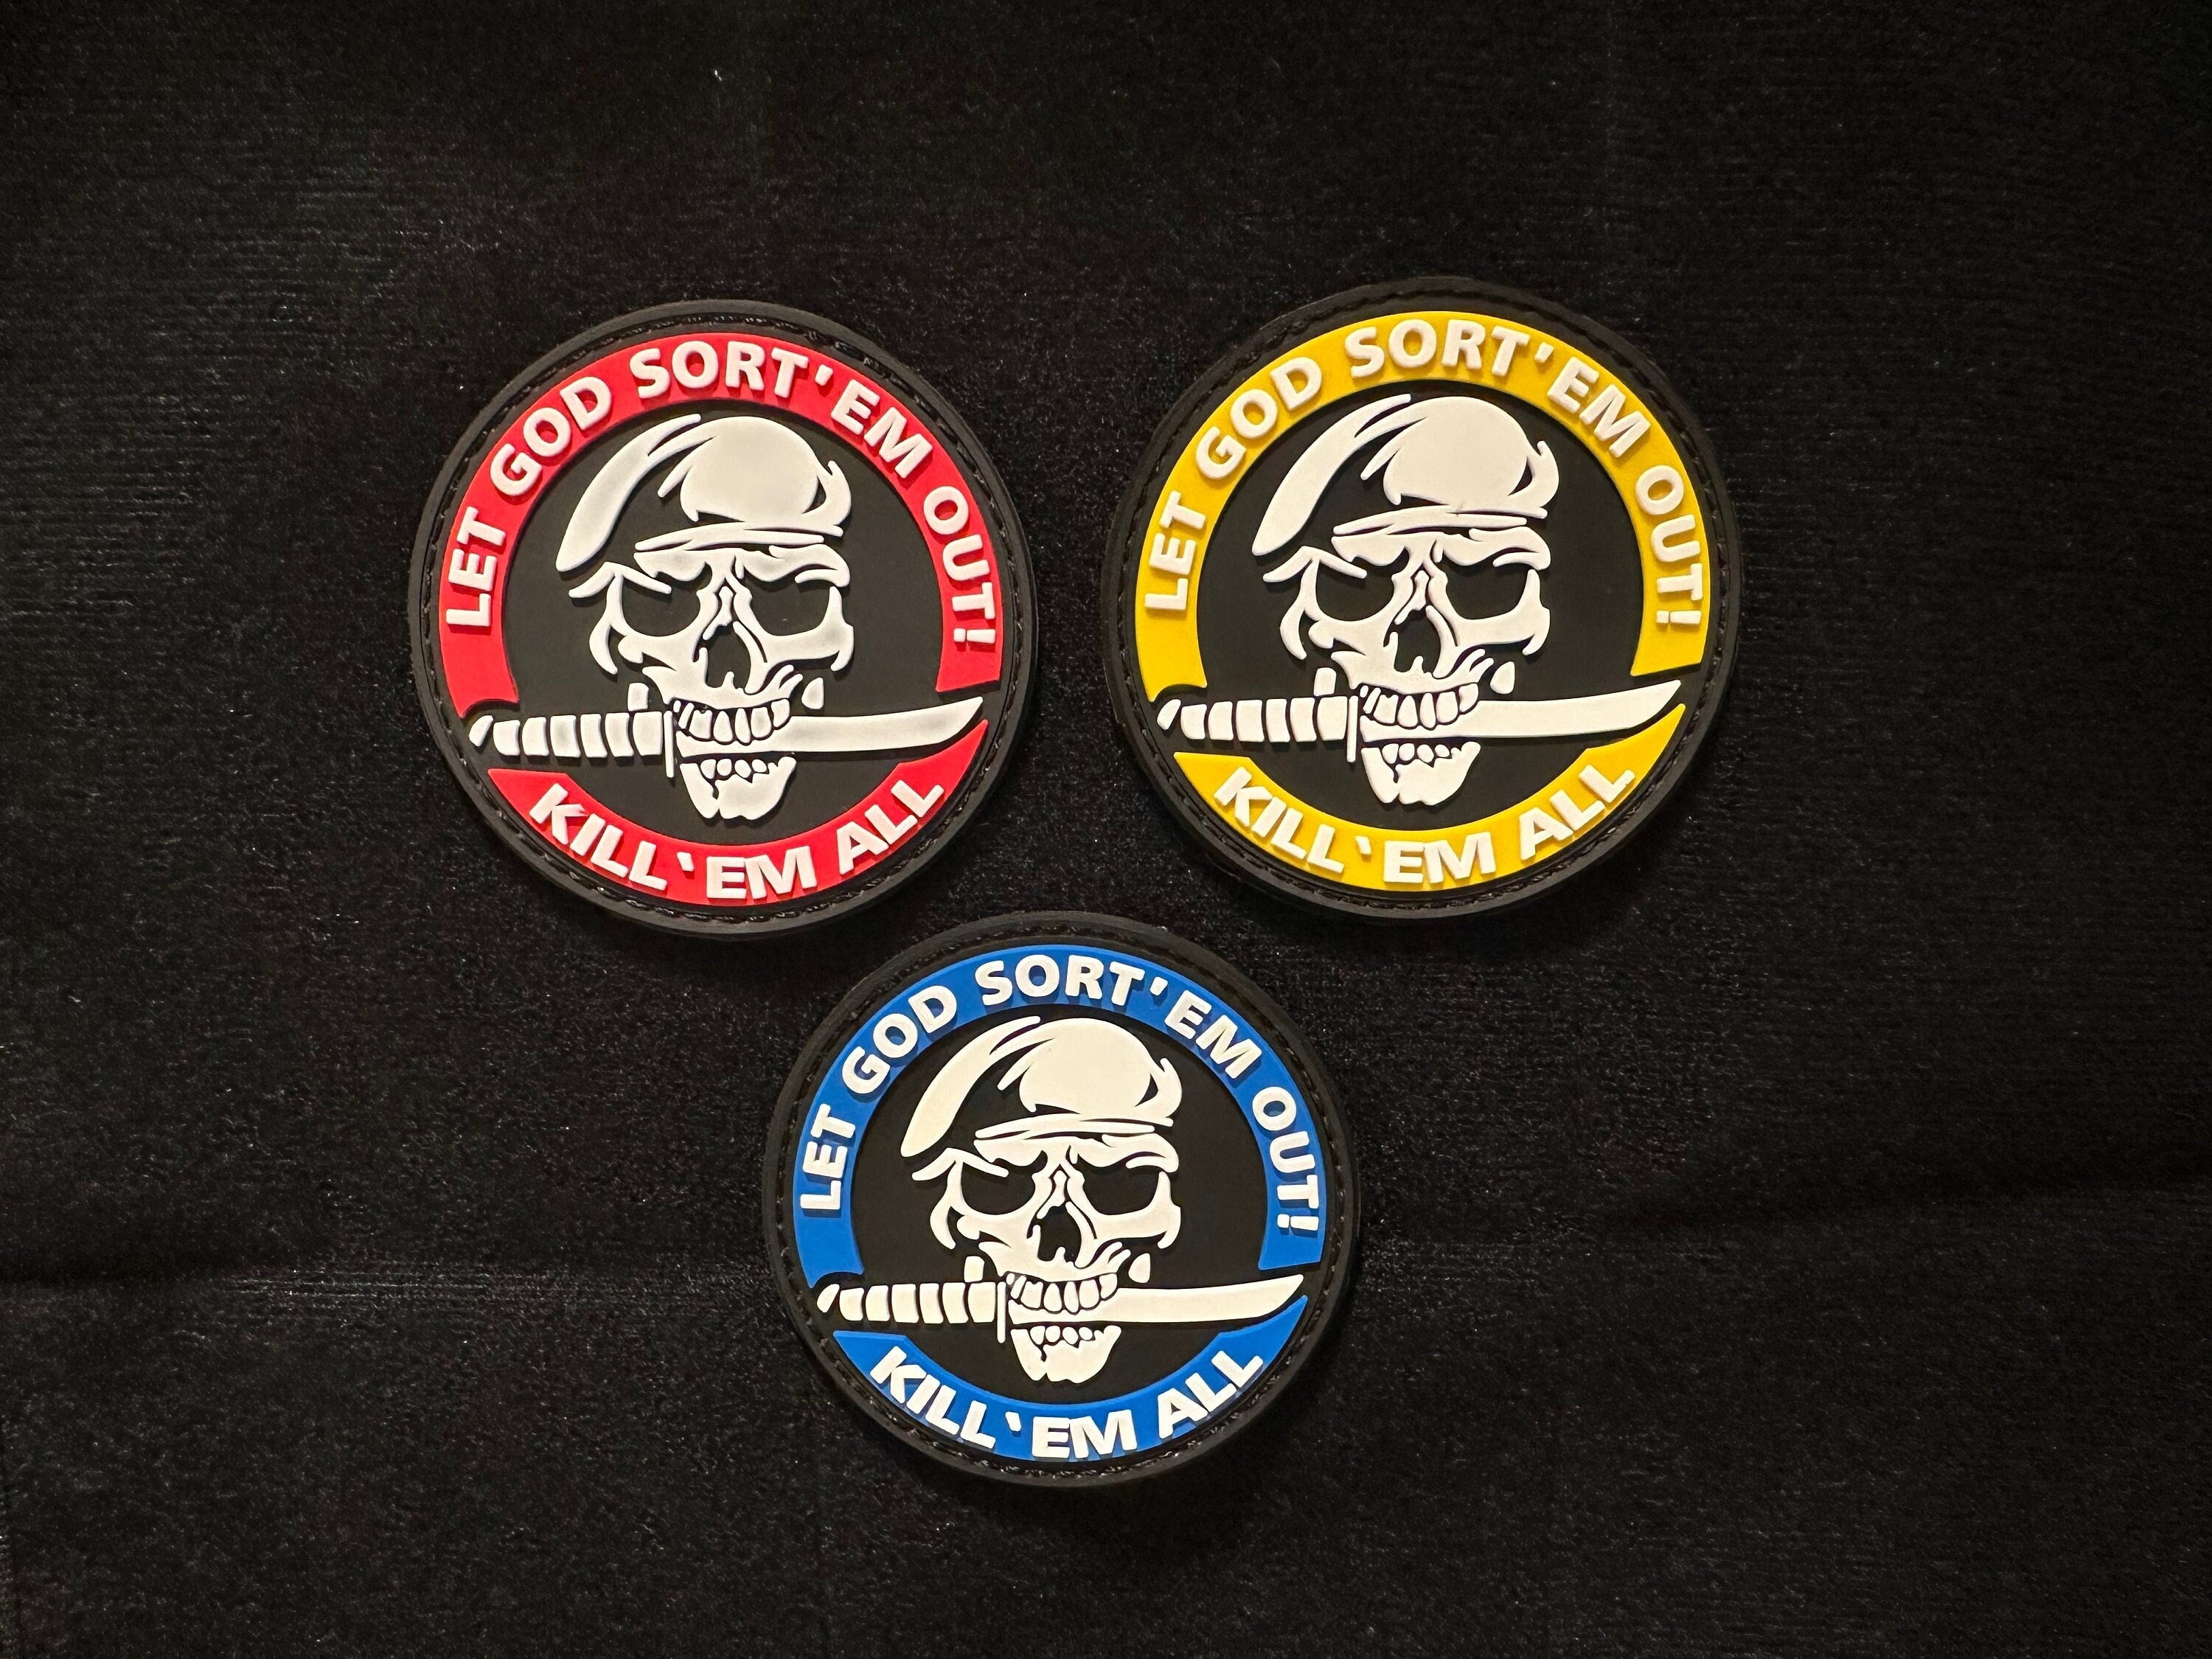 CUSTOM 3.5x2 90х50 Mm Morale Tactical Skull Punisher PATCH / Personalized  Laser Cut Callsign Name Tape Patches Set -  Denmark